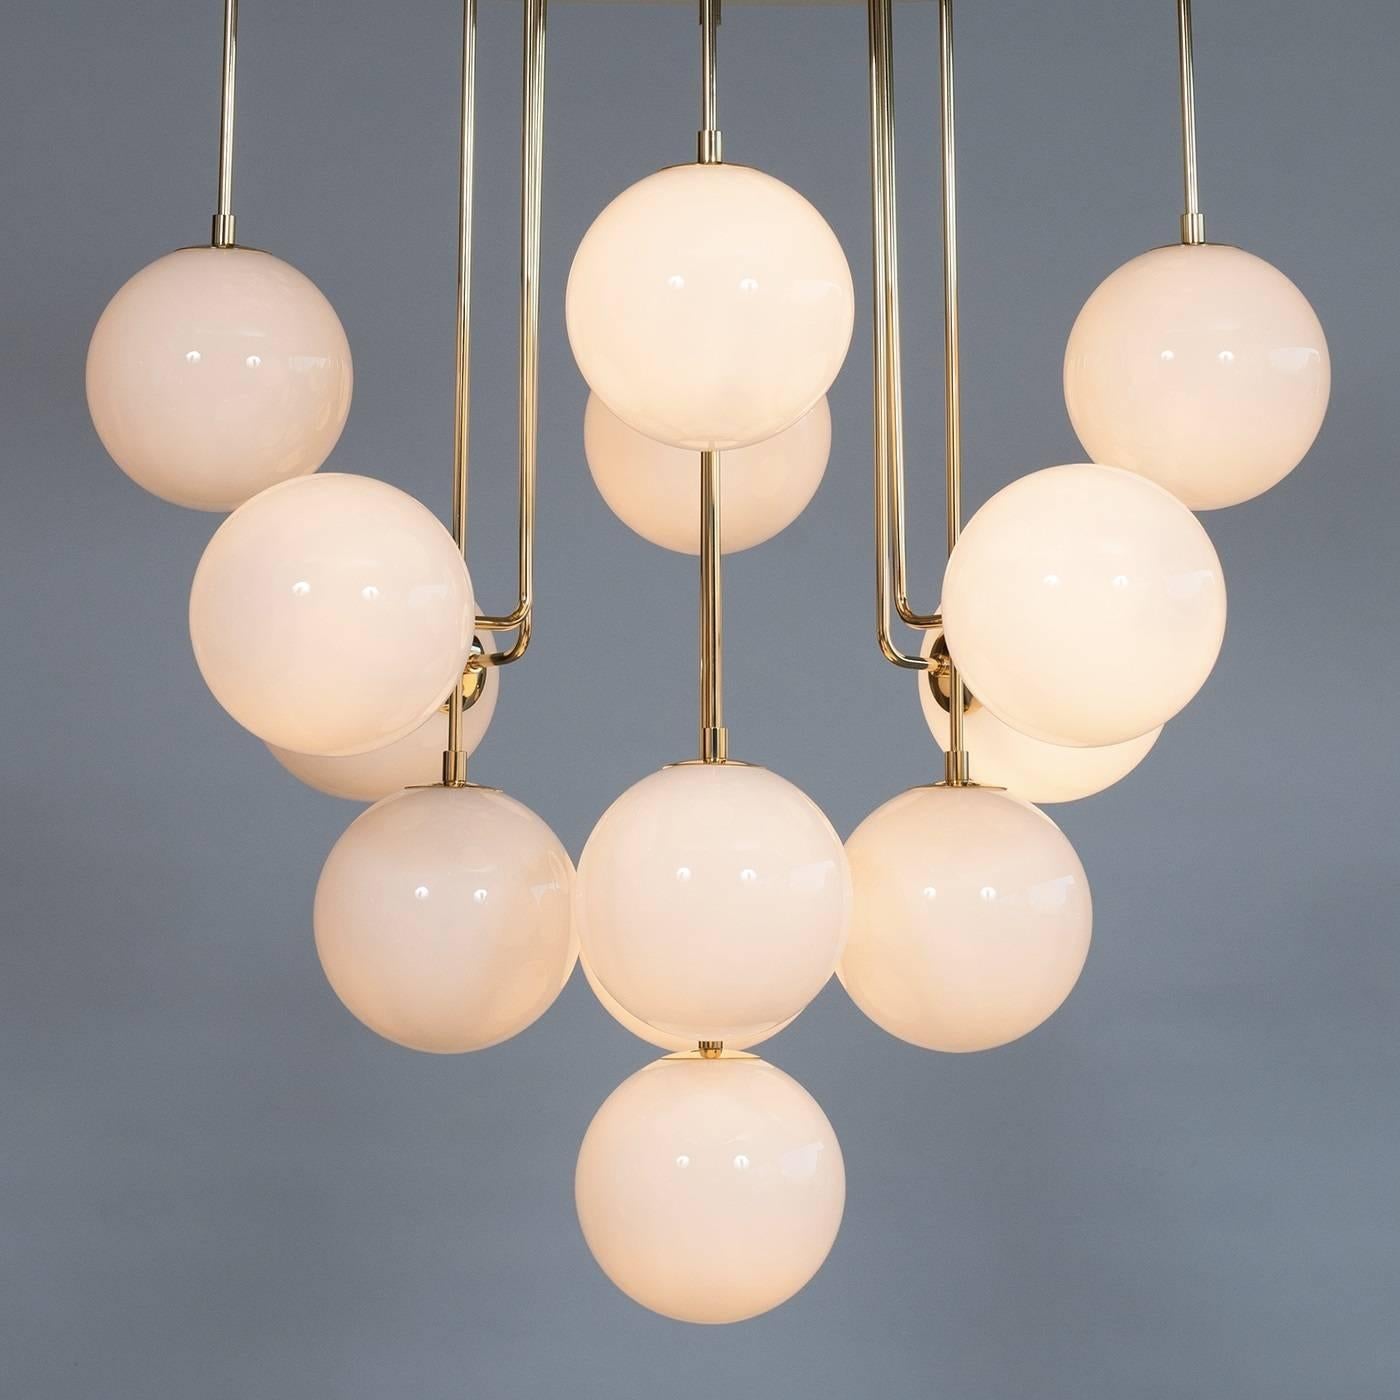 Italian chandelier in Murano glass, composed of white Murano glass spheres, willing in a different levels, with inside a light, supported by an elegant brass frame. The chandelier have thirteen lights. The chandelier is product by Giovanni Dalla